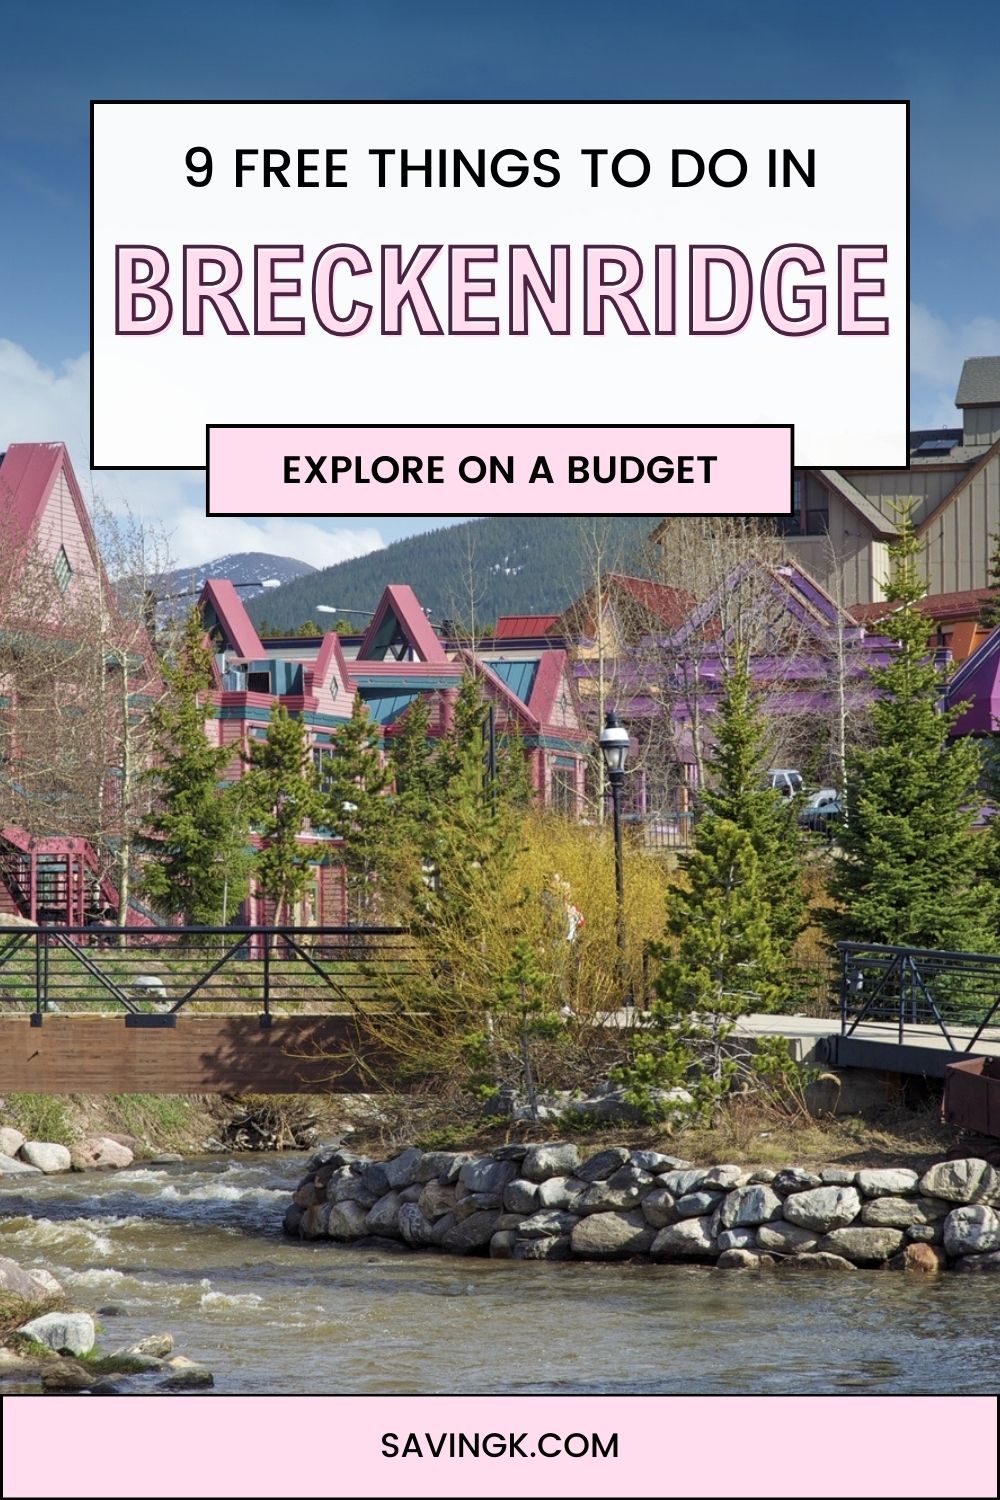 Free Things To Do In Breckenridge: Explore On A Budget